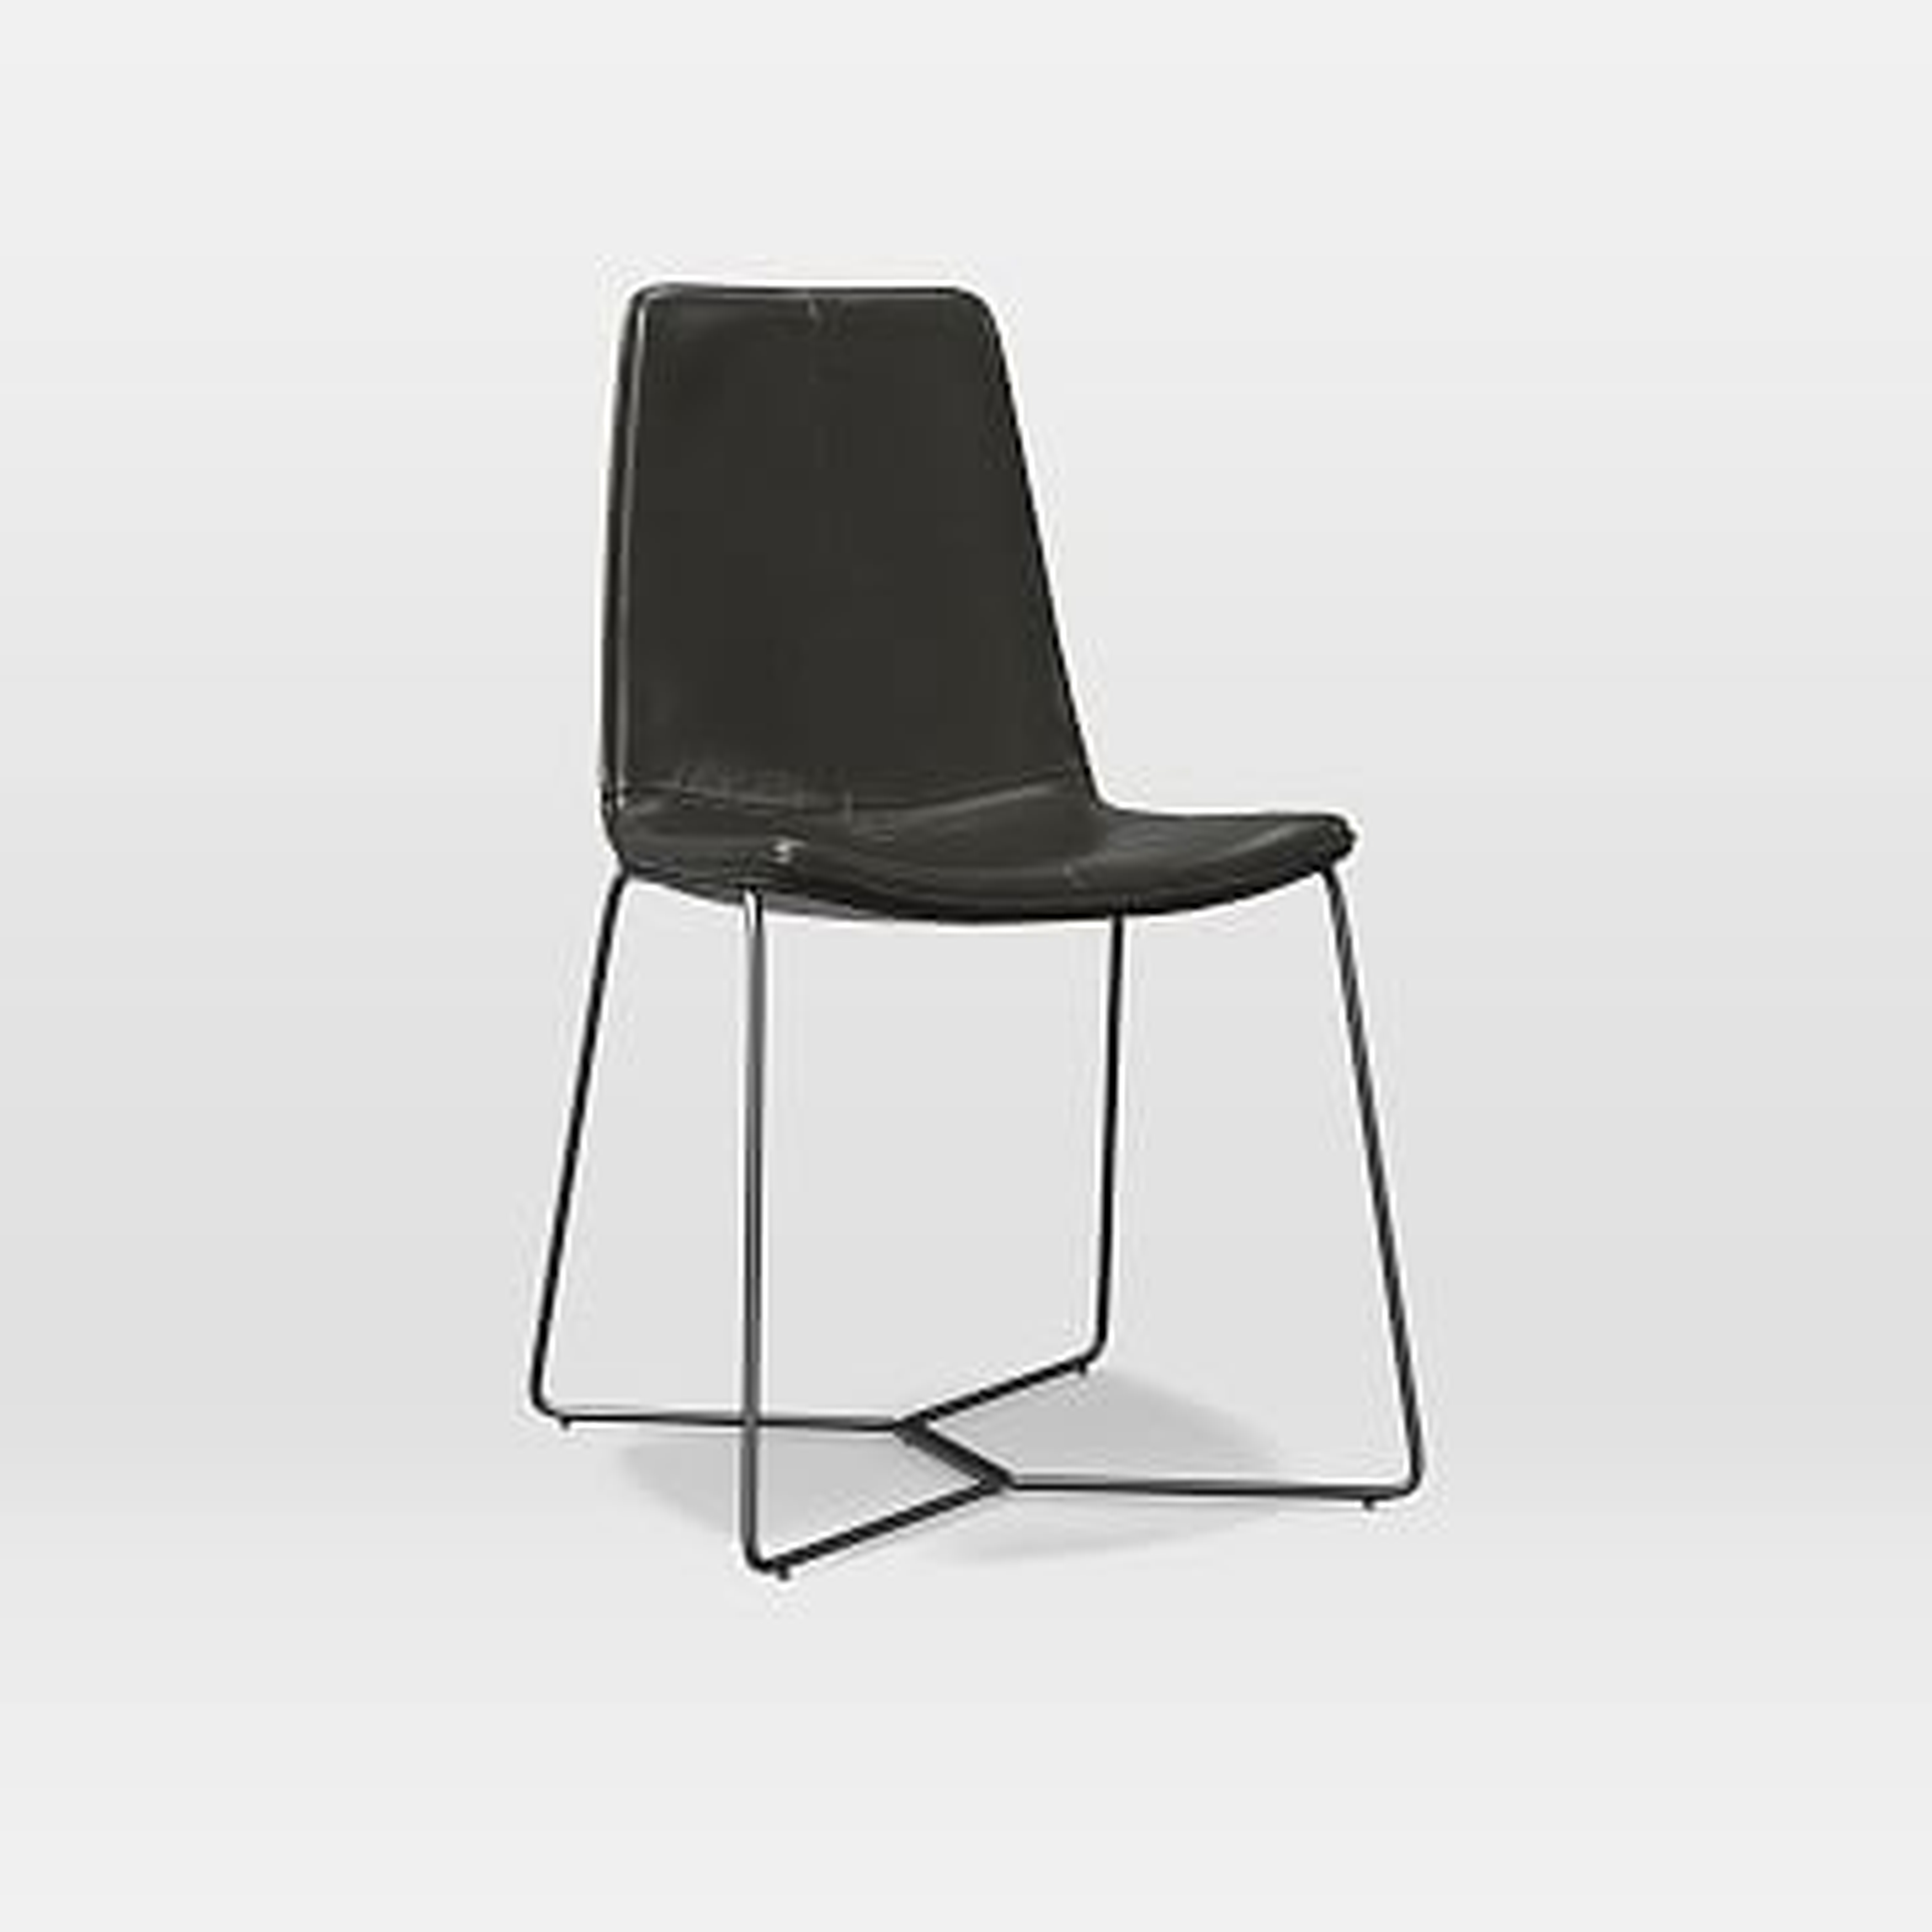 Slope Leather Dining Chair, Parc Leather, Black, Charcoal Leg - West Elm